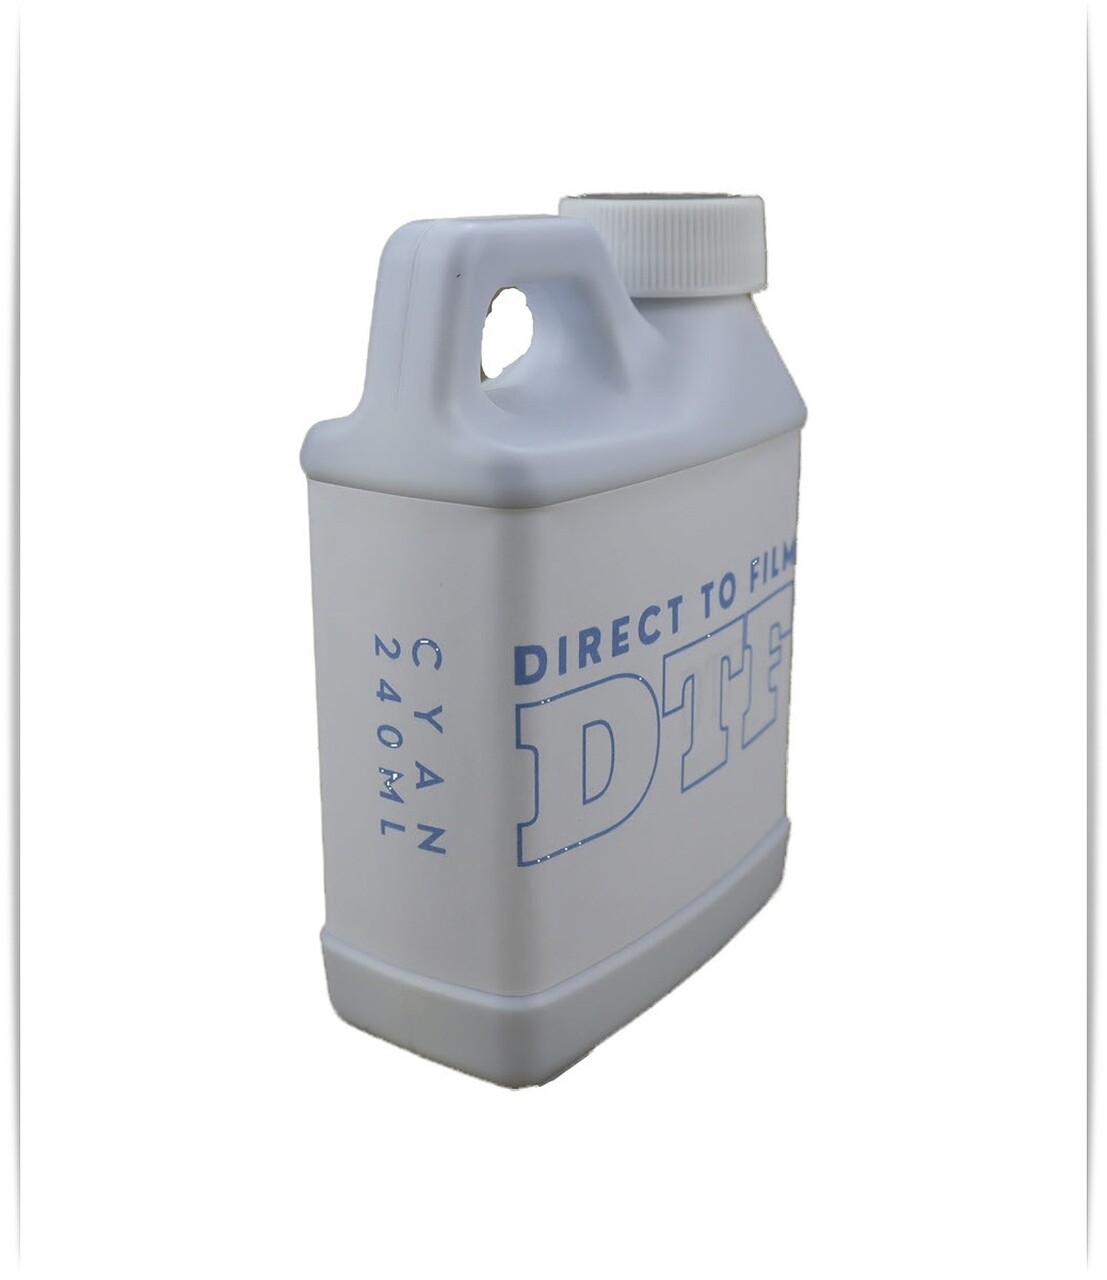 Cyan DTF Ink Direct To Film 240ml Bottle for Epson, Epson Print Head printers